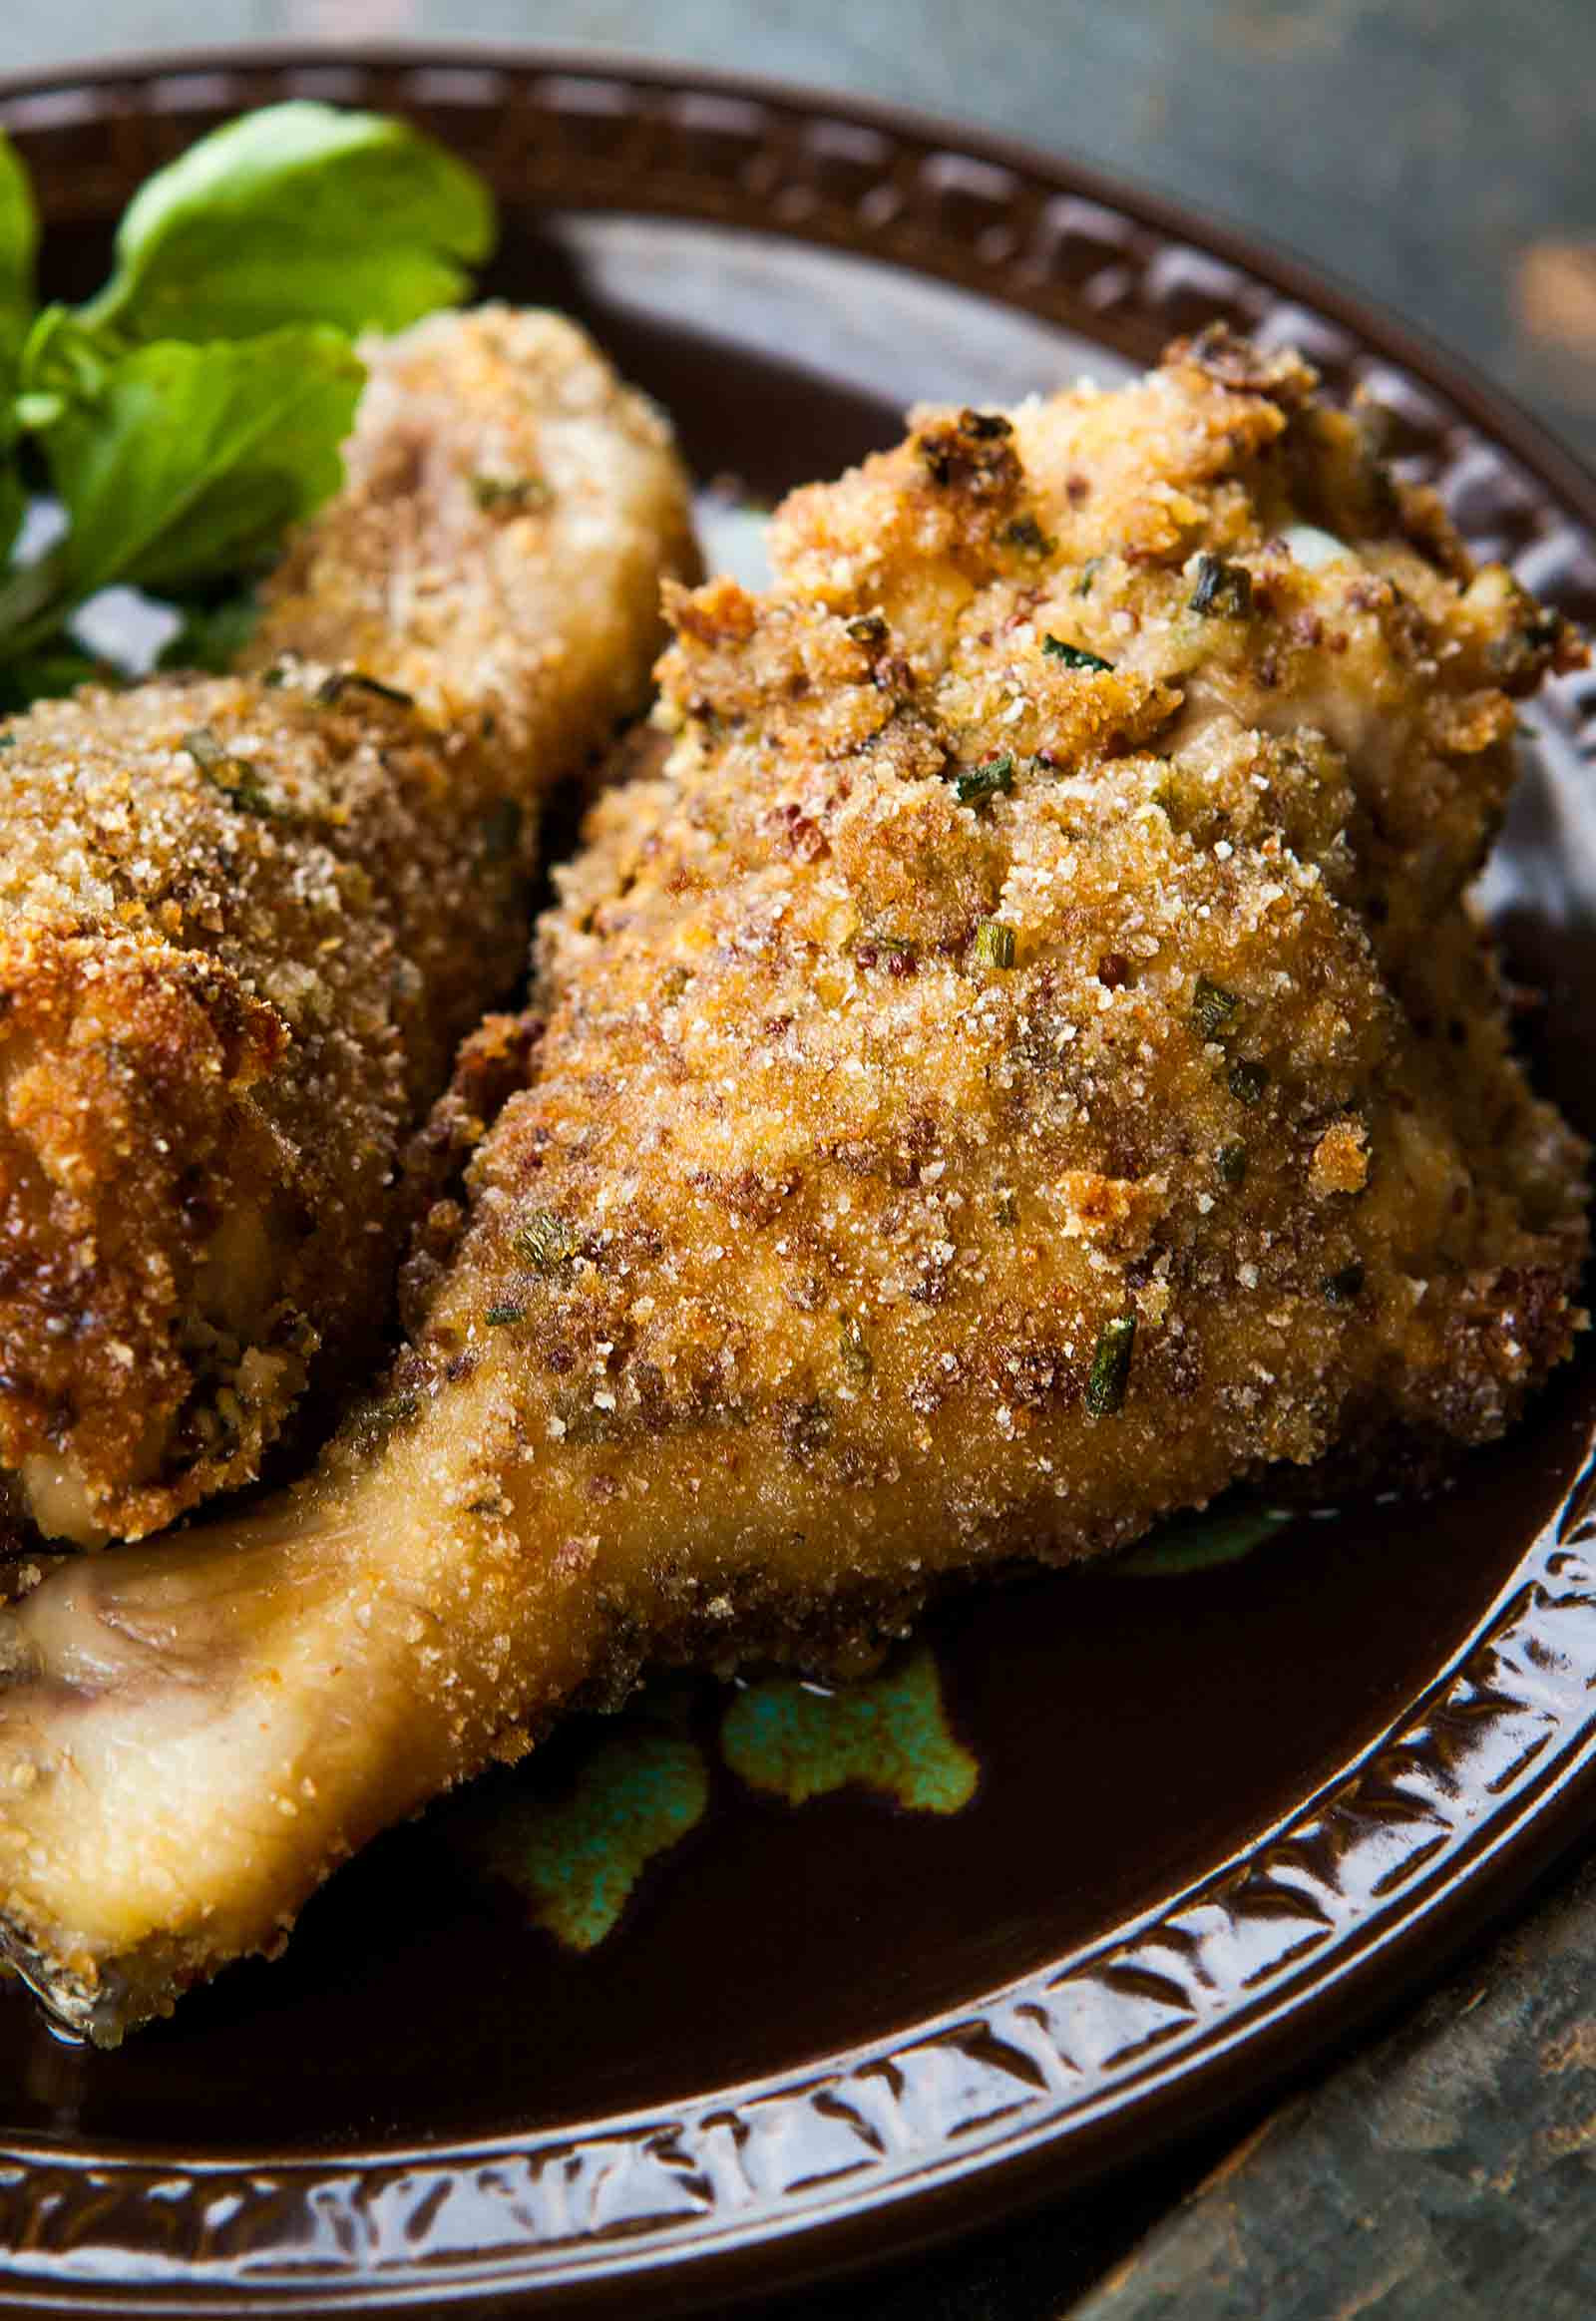 Recipes For Chicken Legs
 Breaded and Baked Chicken Drumsticks Recipe